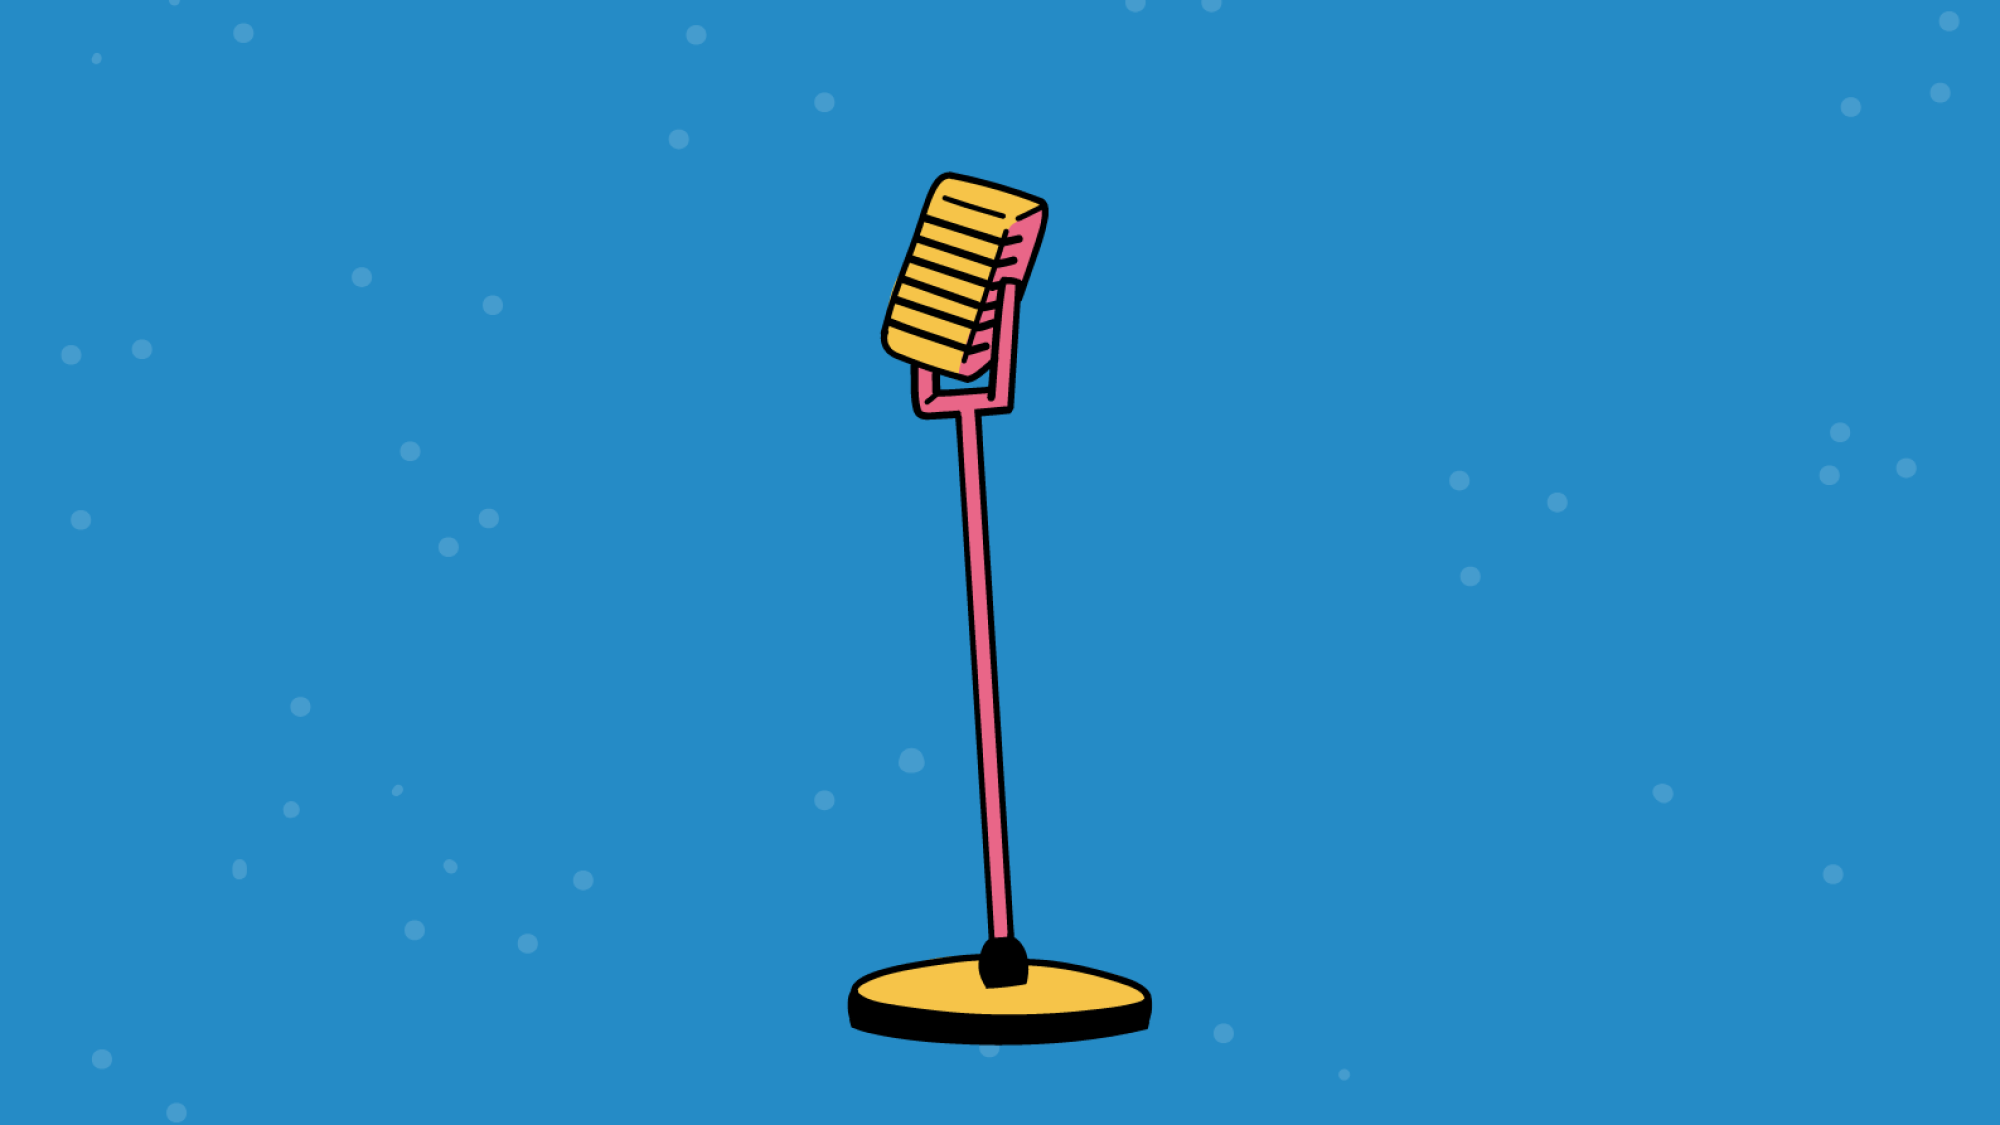 Illustration of a microphone on a stand